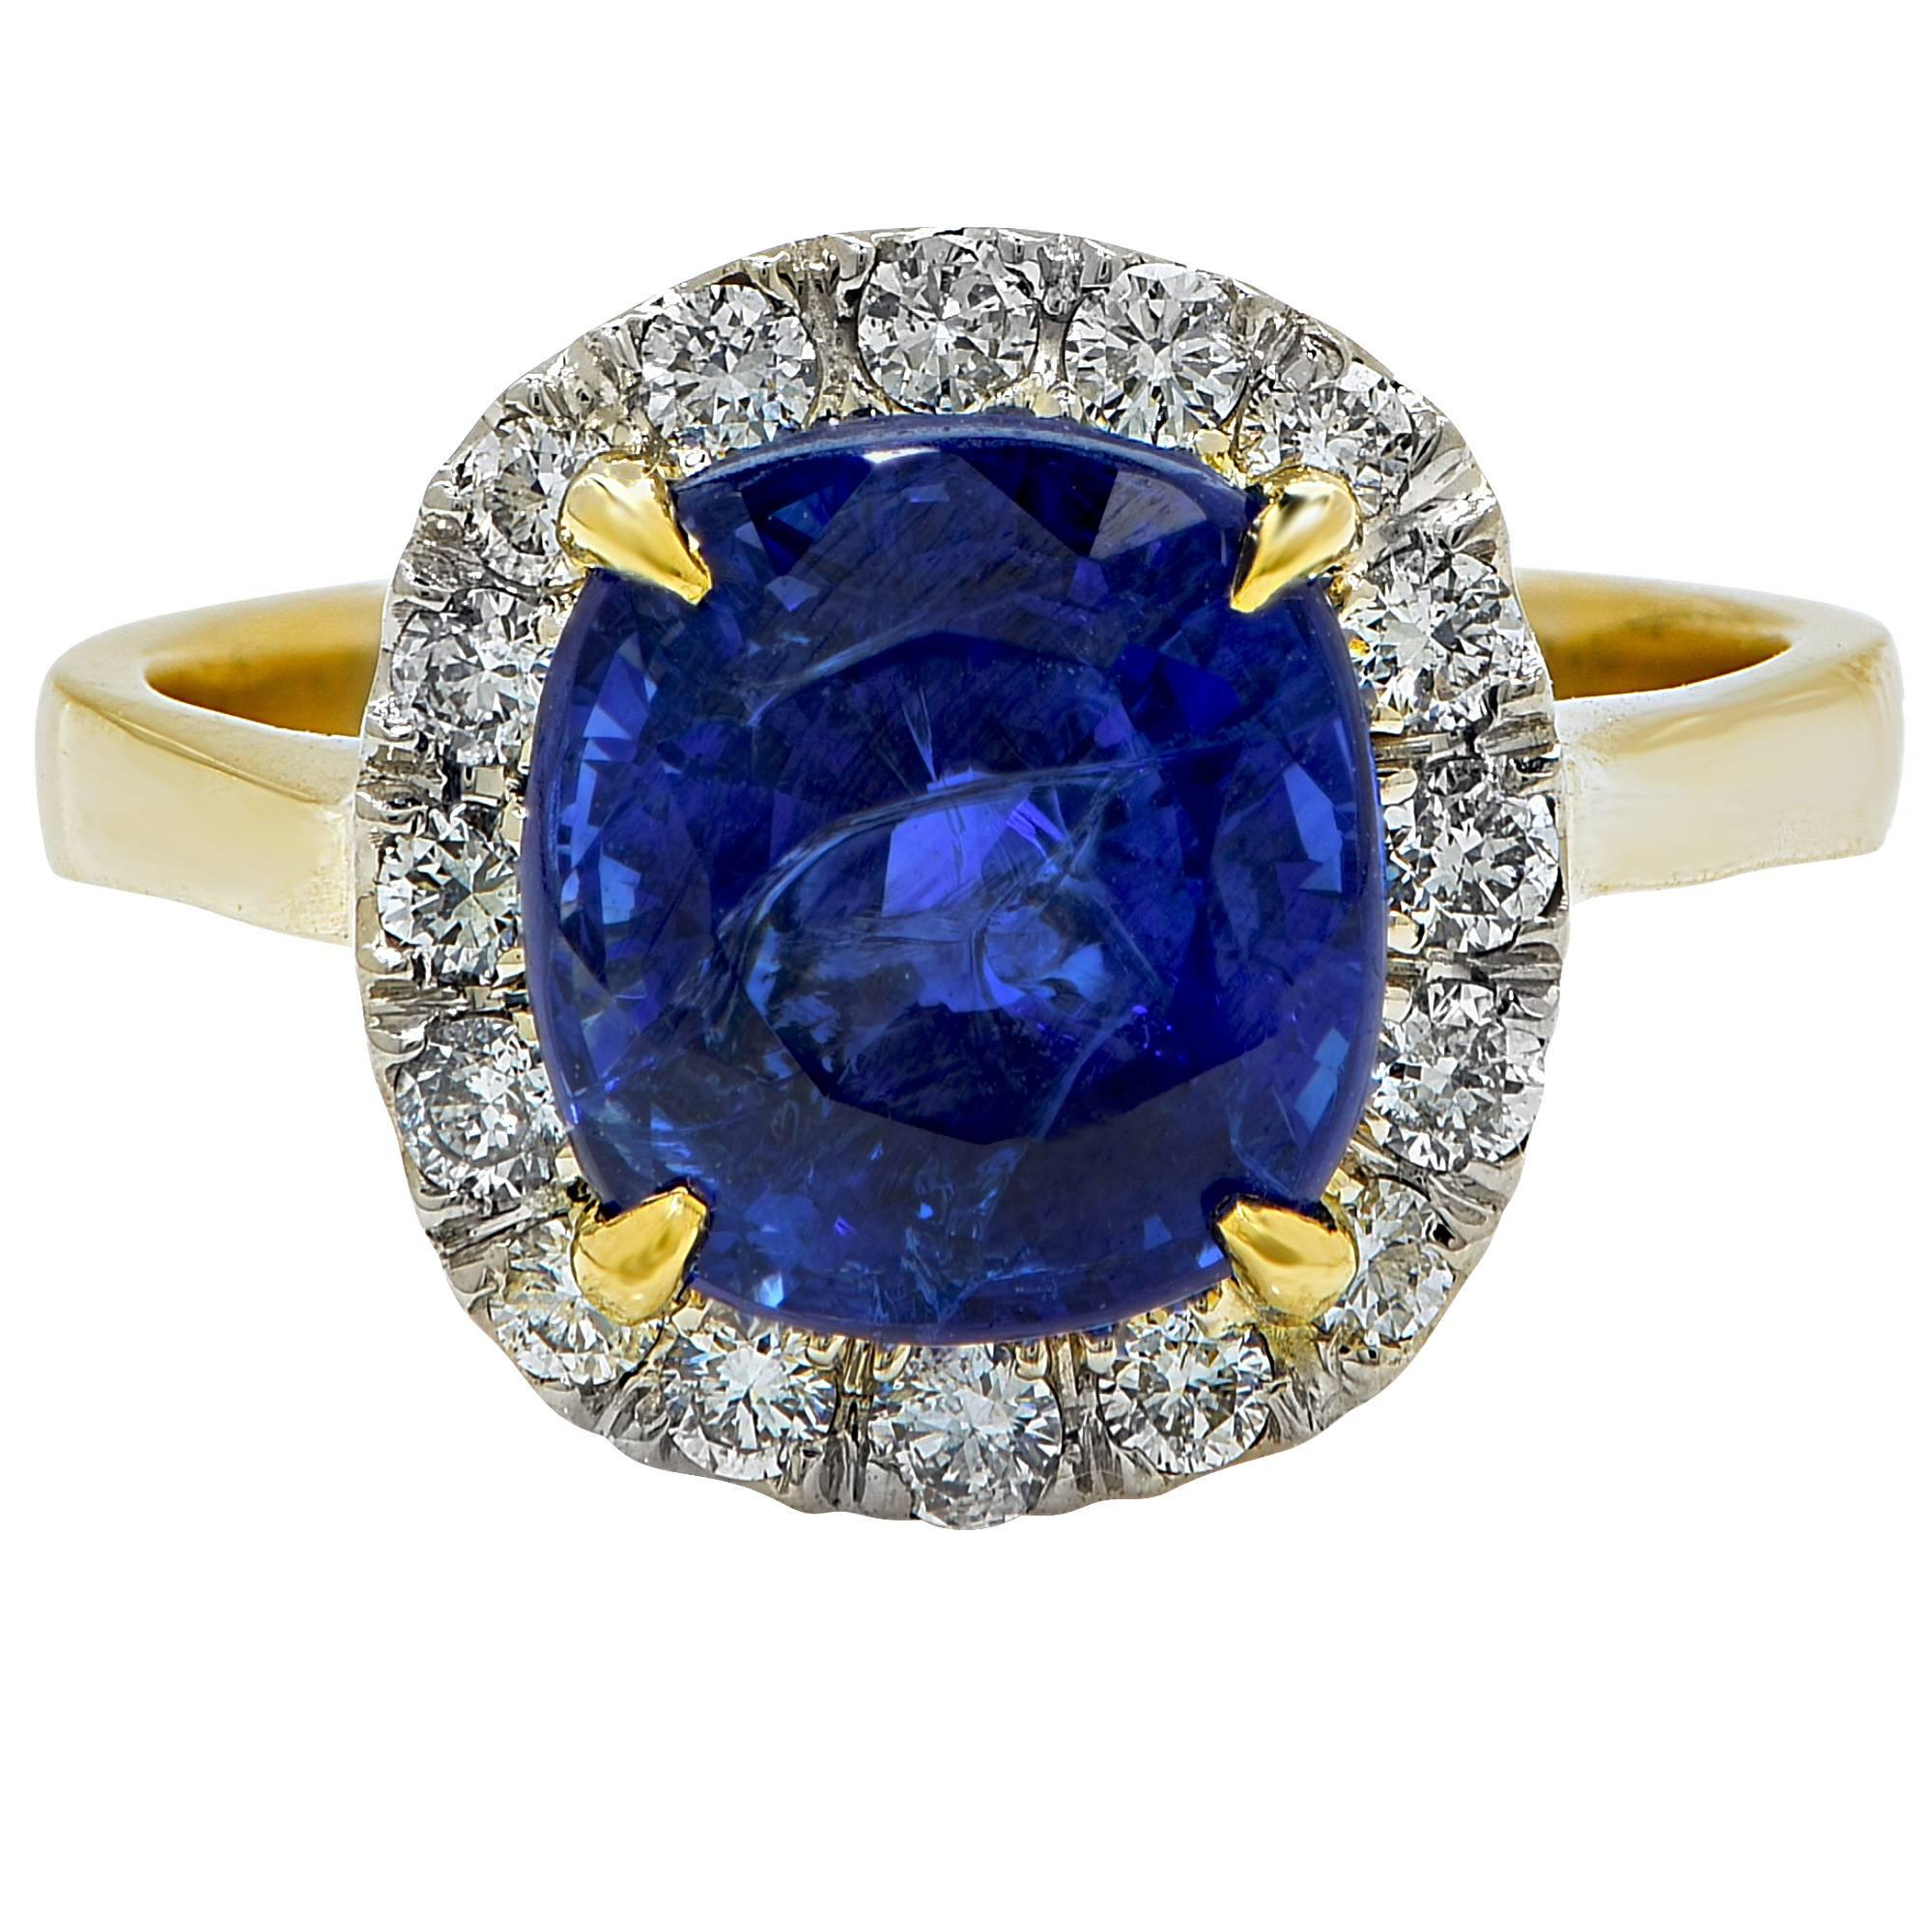 AGL graded 4.97ct vibrant heated blue sapphire from Madagascar set in to an 18k yellow gold ring and surrounded by 16 round brilliant cut diamonds G-H color and SI1 clarity.

The ring is a size 6 and can be sized up or down.
It is stamped and tested